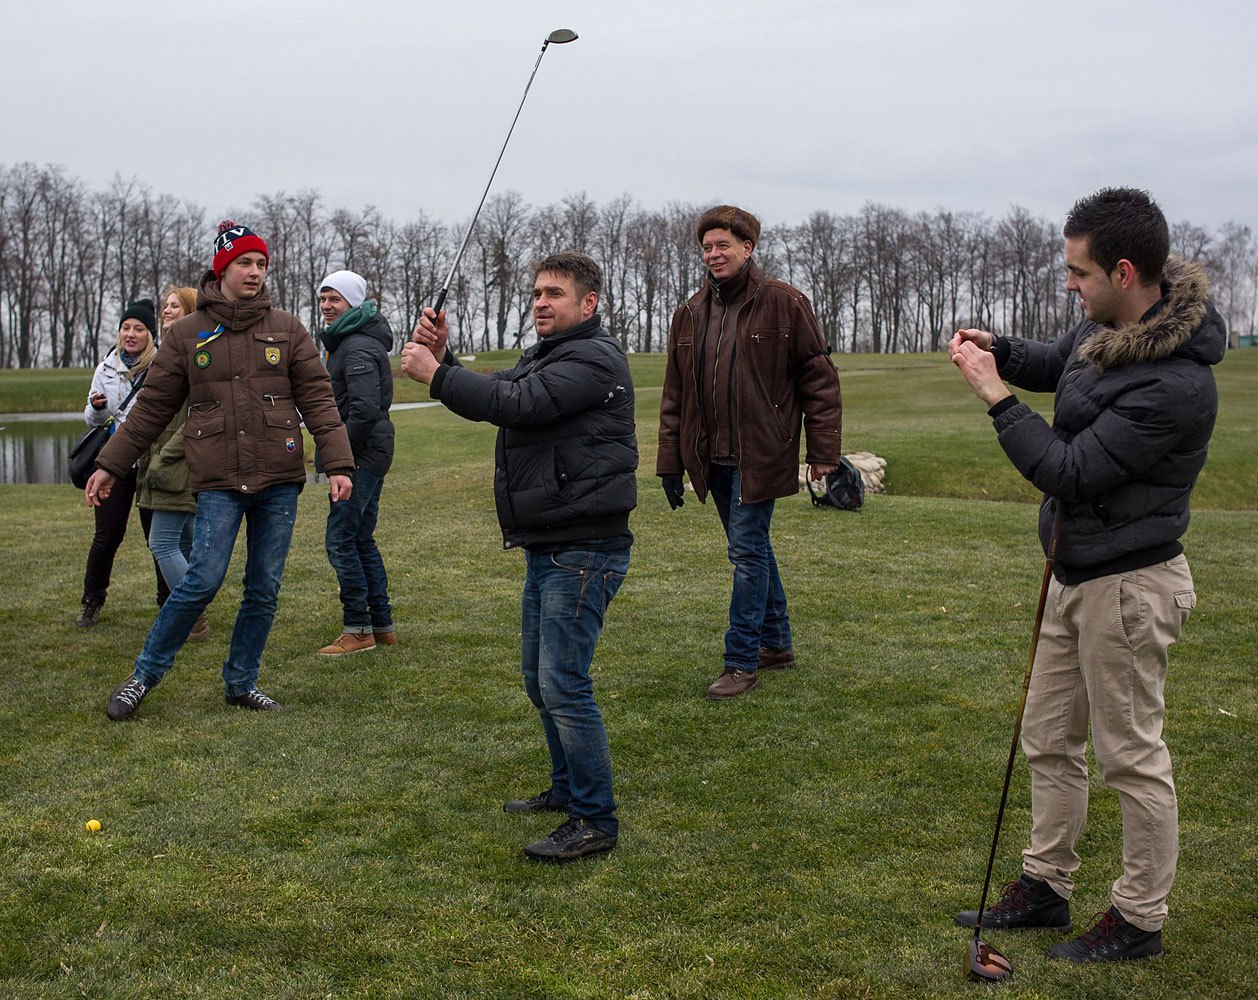 Protesters try to play on a golf course at the Ukrainian President Yanukovych's countryside residence.